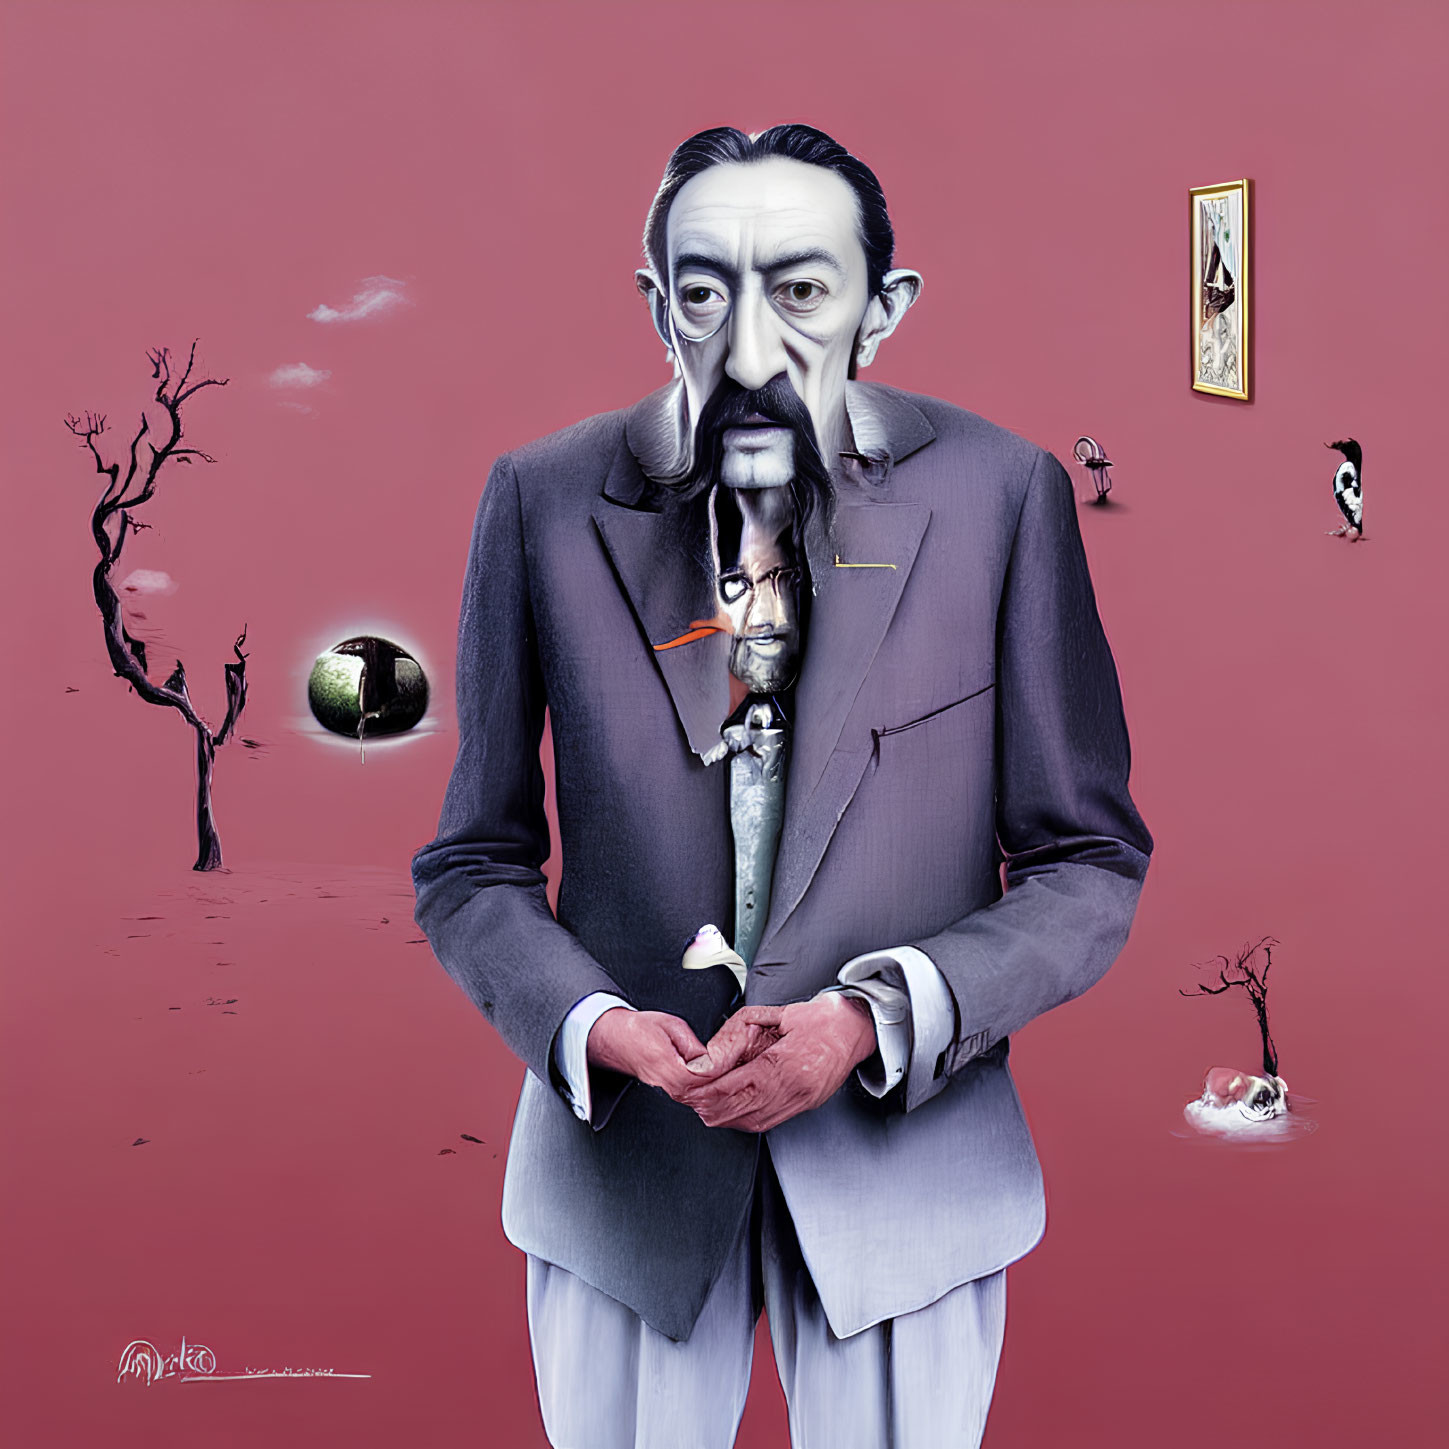 Surreal portrait with Dali-like imagery and exaggerated facial features